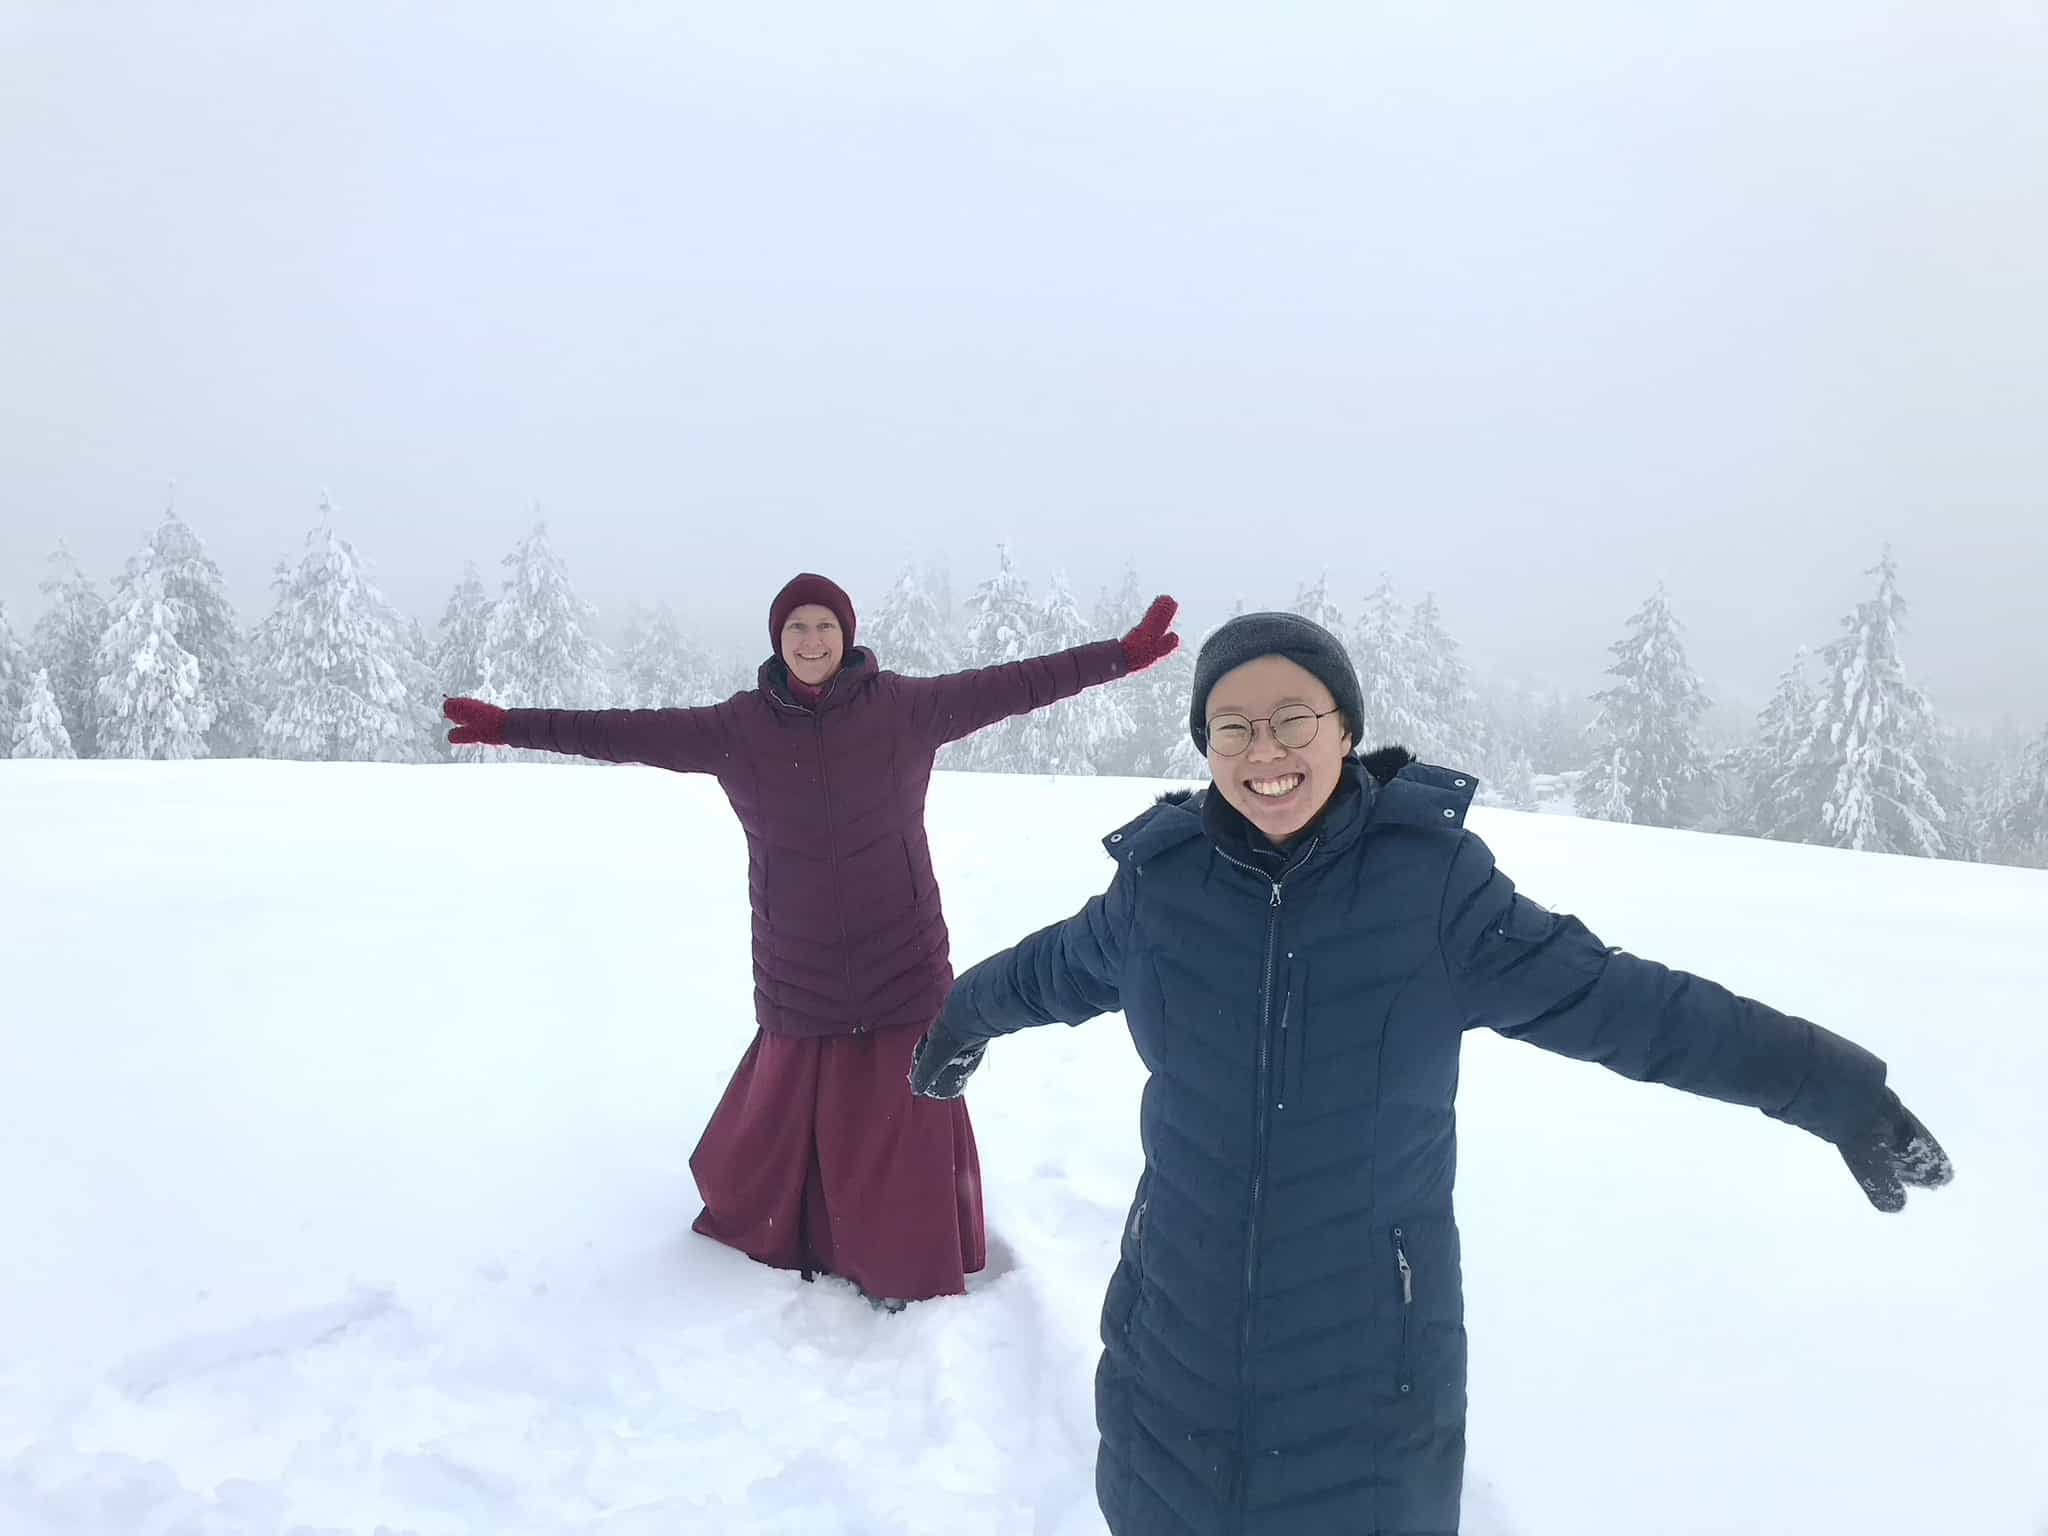 Dronsel and a monastic smiling with arms out, in a snowy meadow.